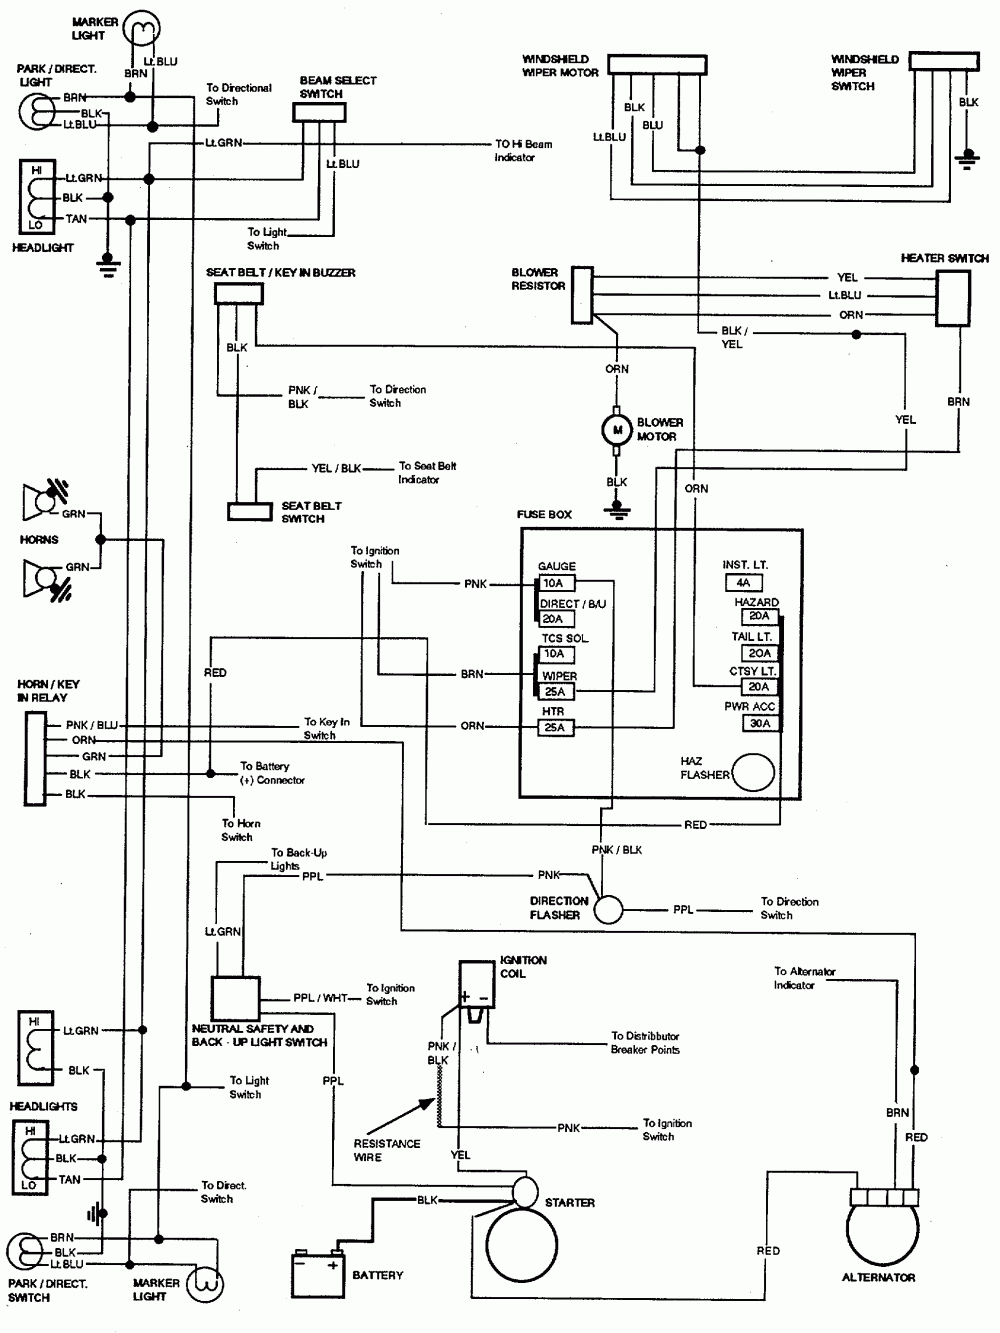 Wiring Diagram For 86 Chevy Truck - Wiring Diagram Detailed - 1972 Chevy Truck Wiring Diagram